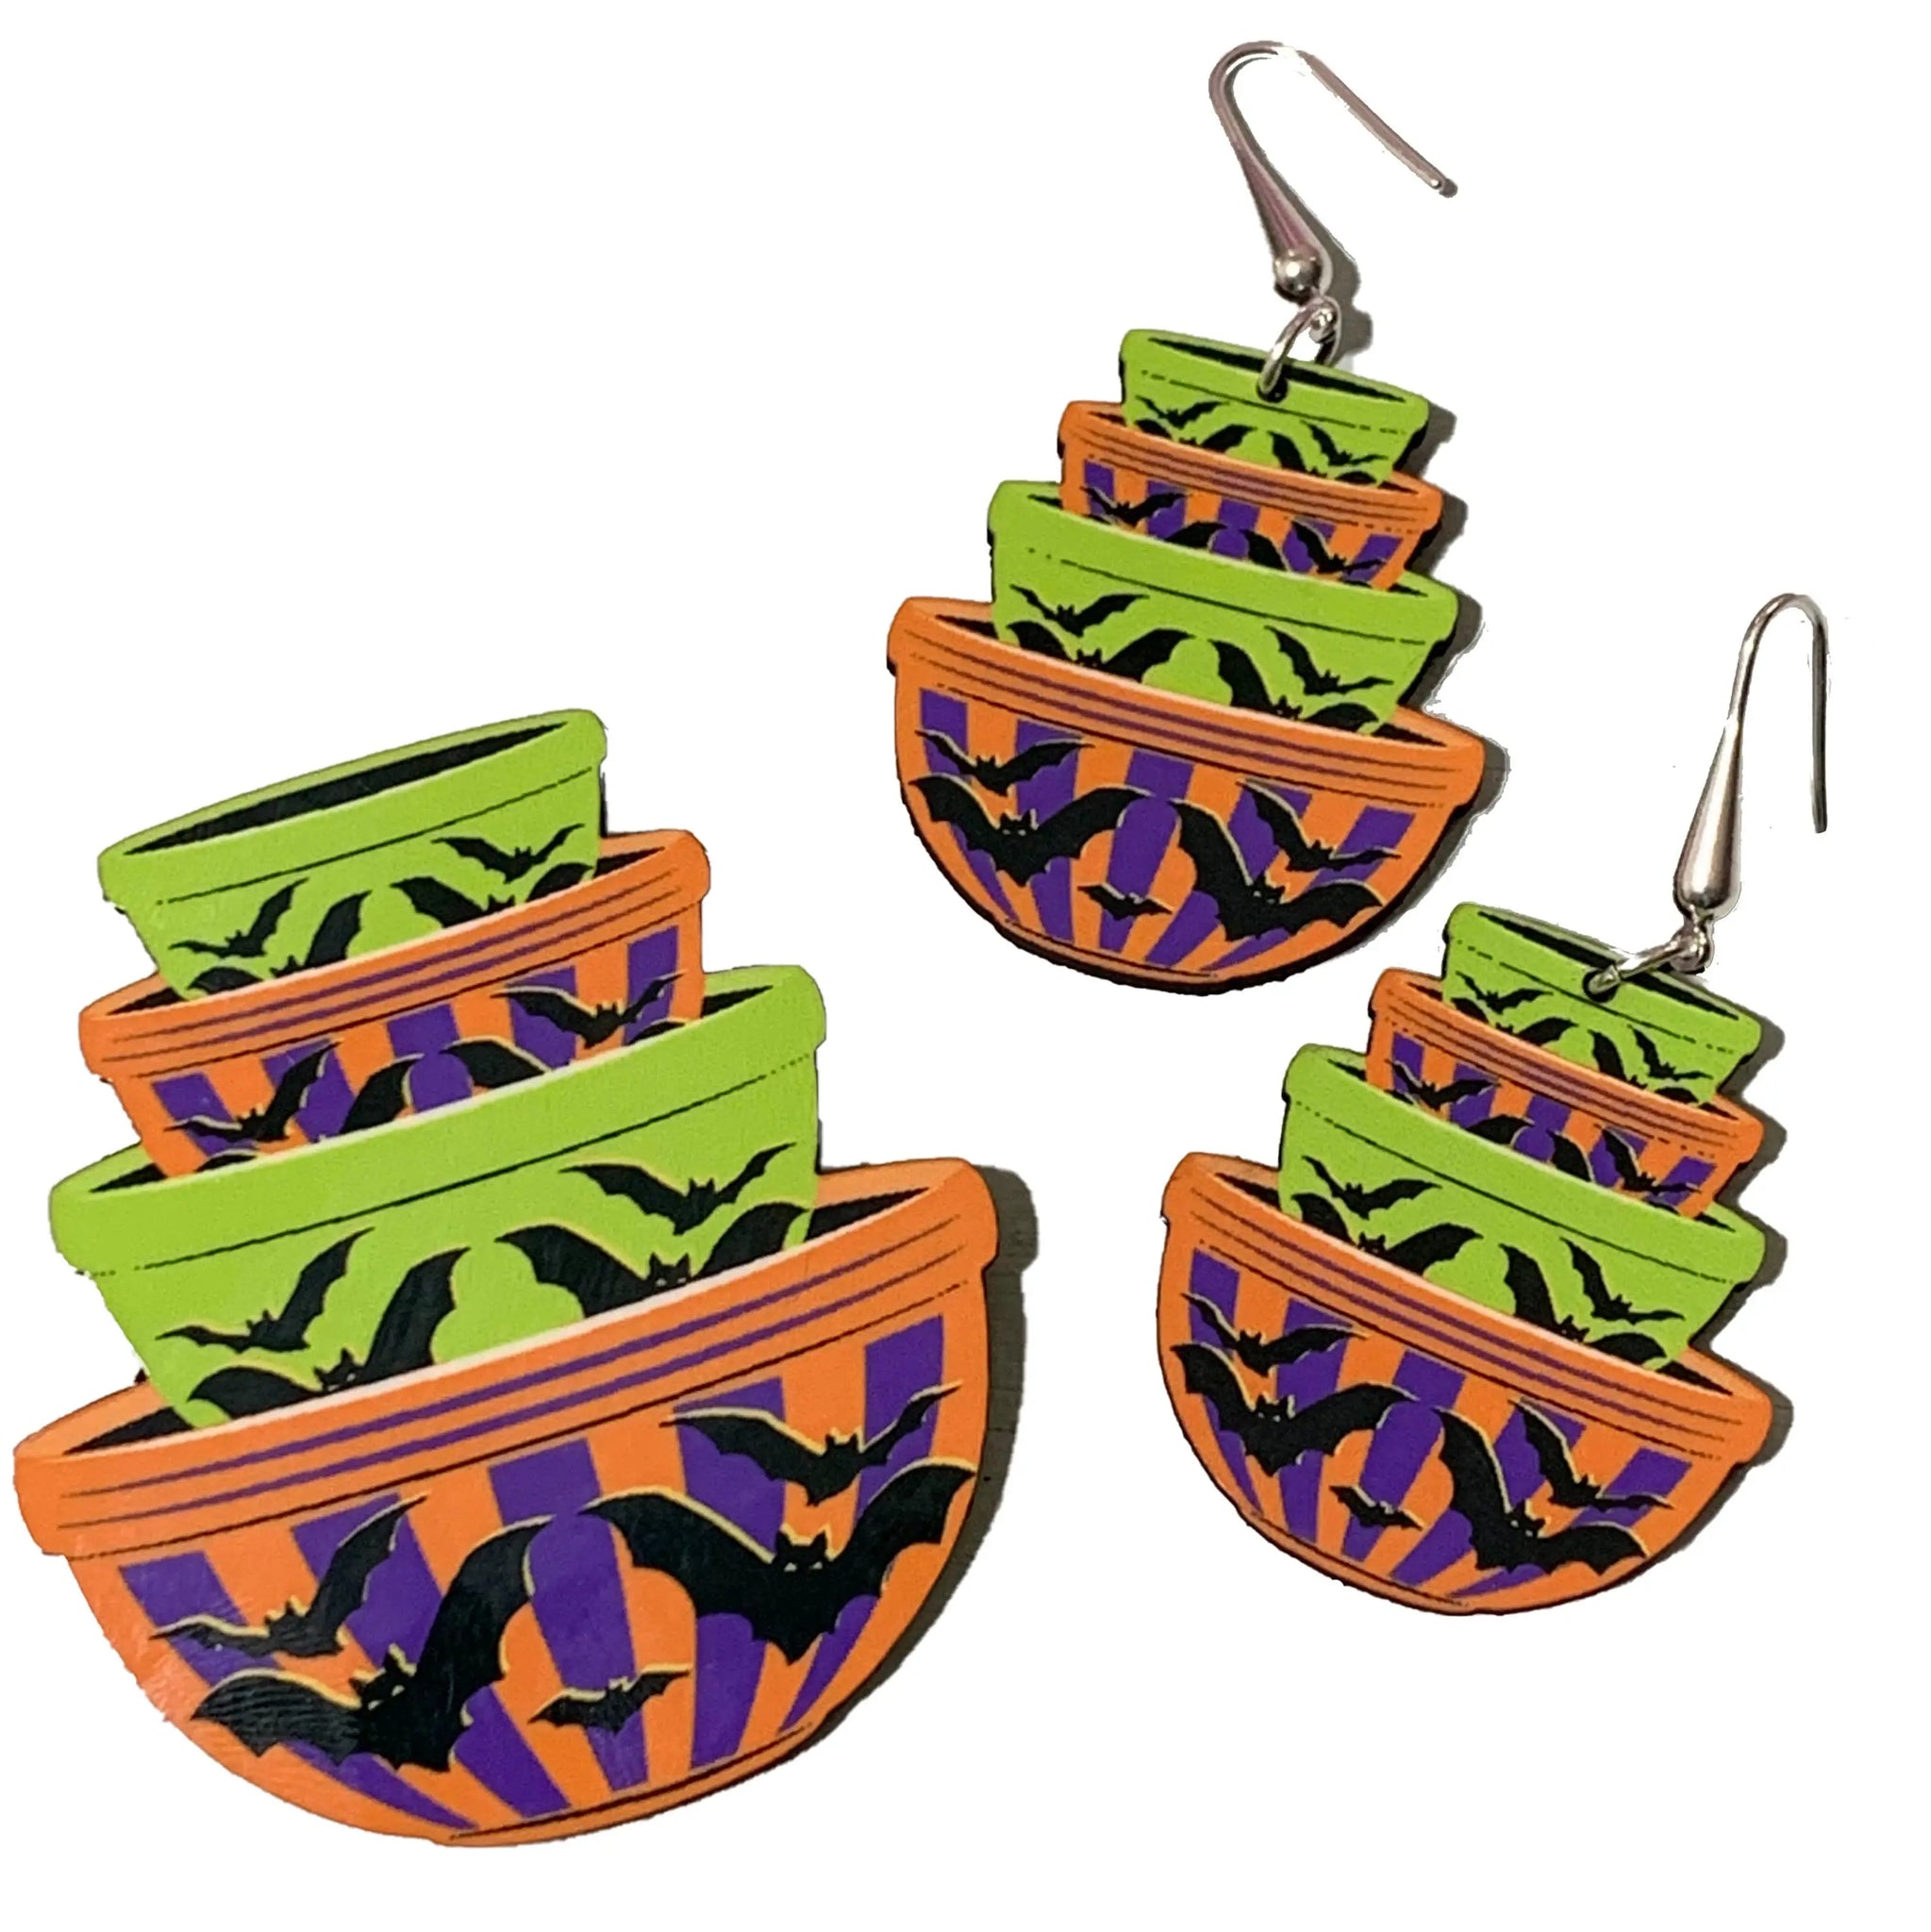 A set of dangle earrings and a brooch in the shape of a stack of green, purple, and orange mixing bowls in the style of vintage Pyrex kitchenware. Each piece is a stack of 4 striped bowls and has small black bats on each 